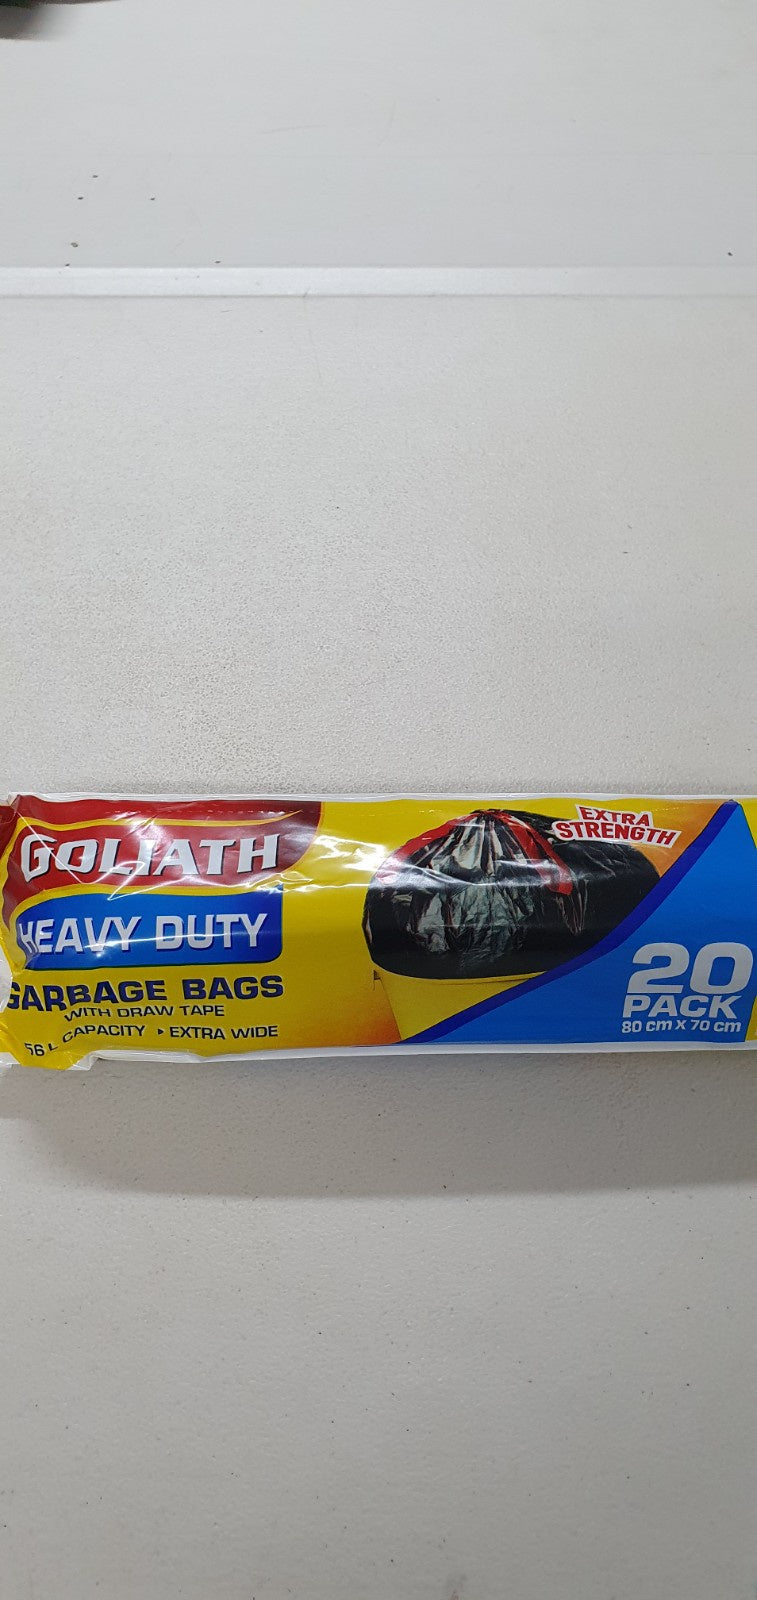 Goliath Extra Strong Draw Tape Garbage Bags 56L 20Pk